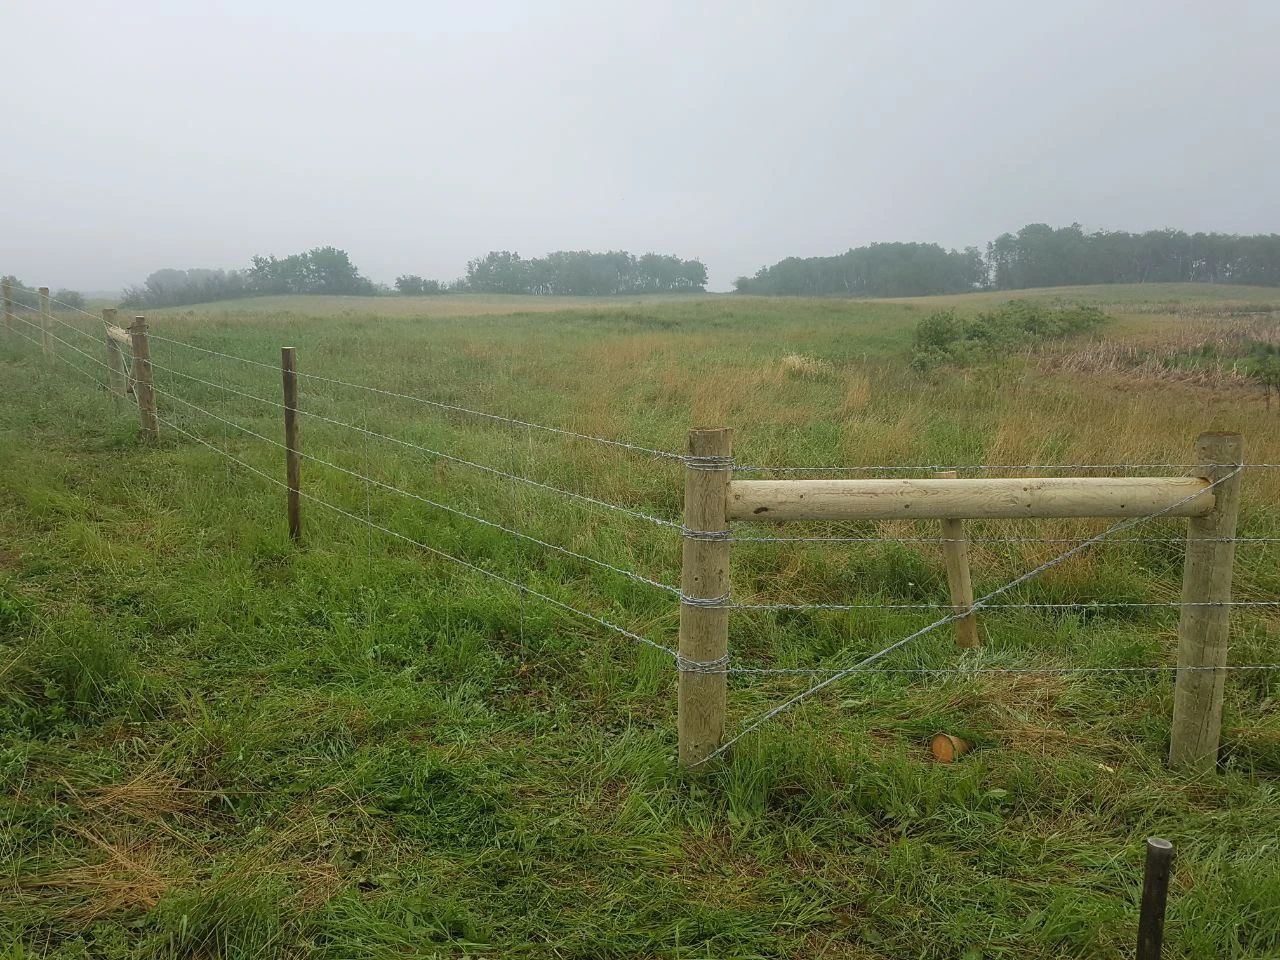 Barb Wire Fencing: Affordable and Secure Solution for Your Property